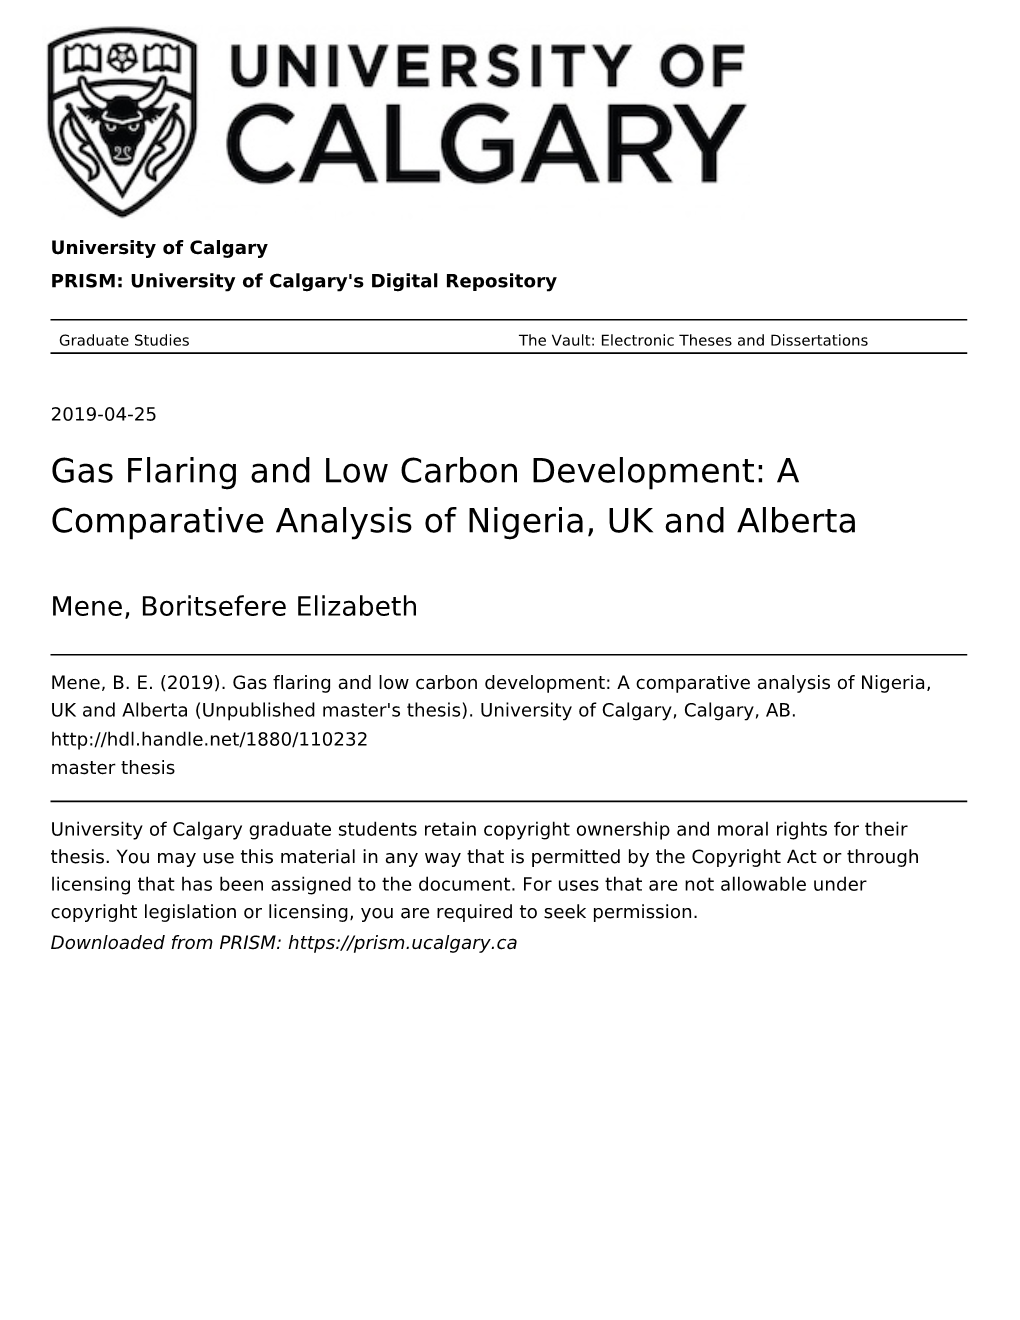 Gas Flaring and Low Carbon Development: a Comparative Analysis of Nigeria, UK and Alberta